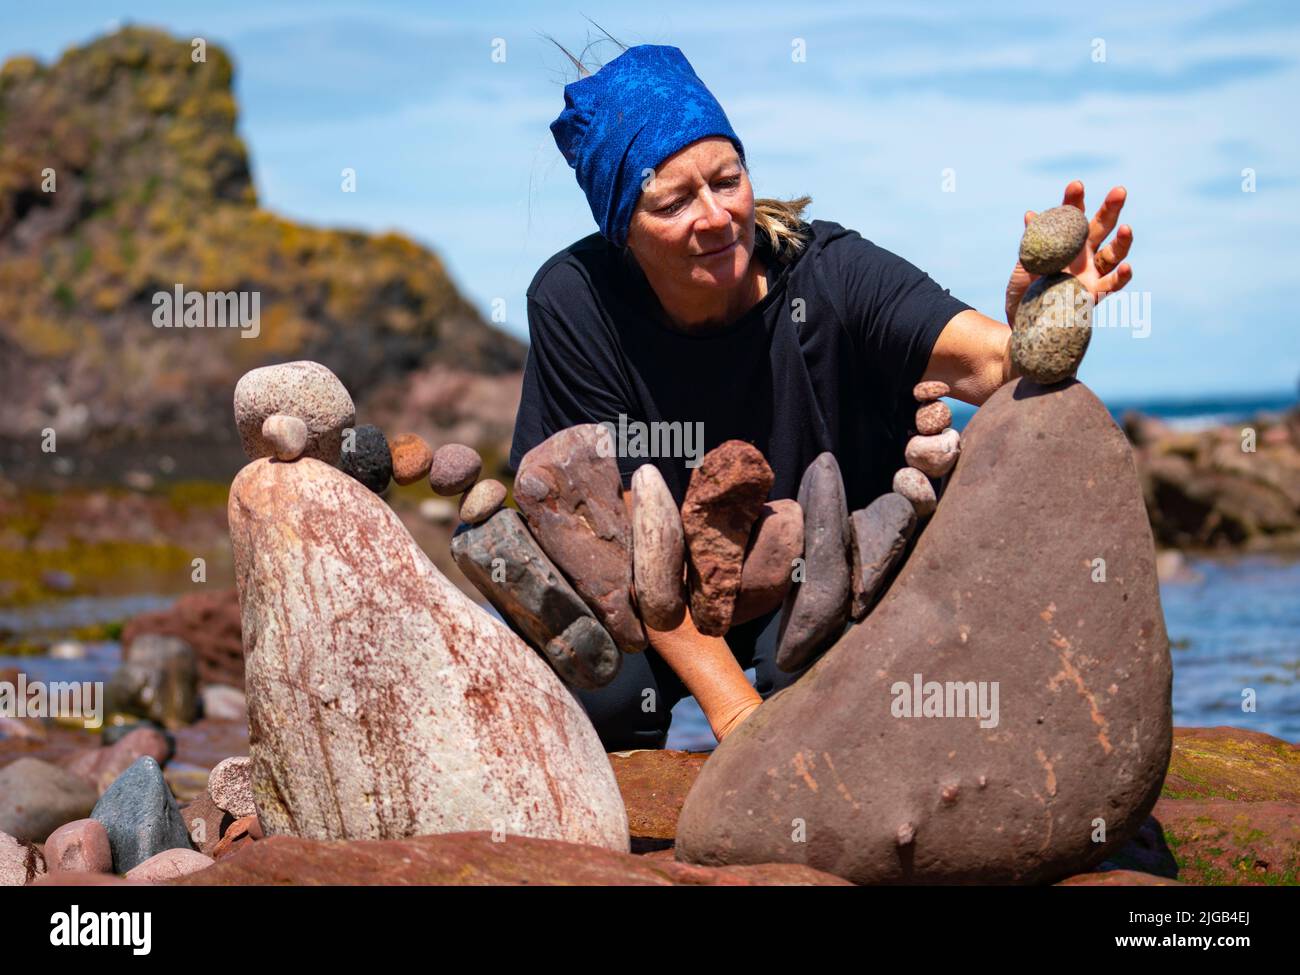 Dunbar, Scotland, UK. 9 July 2022. Day one of the 11th Stone Stacking Championships held at Eye Cave Beach in Dunbar in East Lothian. . Competitors are shown during the arch building competition. Pic; Caroline Walker buds a stone arch.  Iain Masterton/Alamy Live News Stock Photo